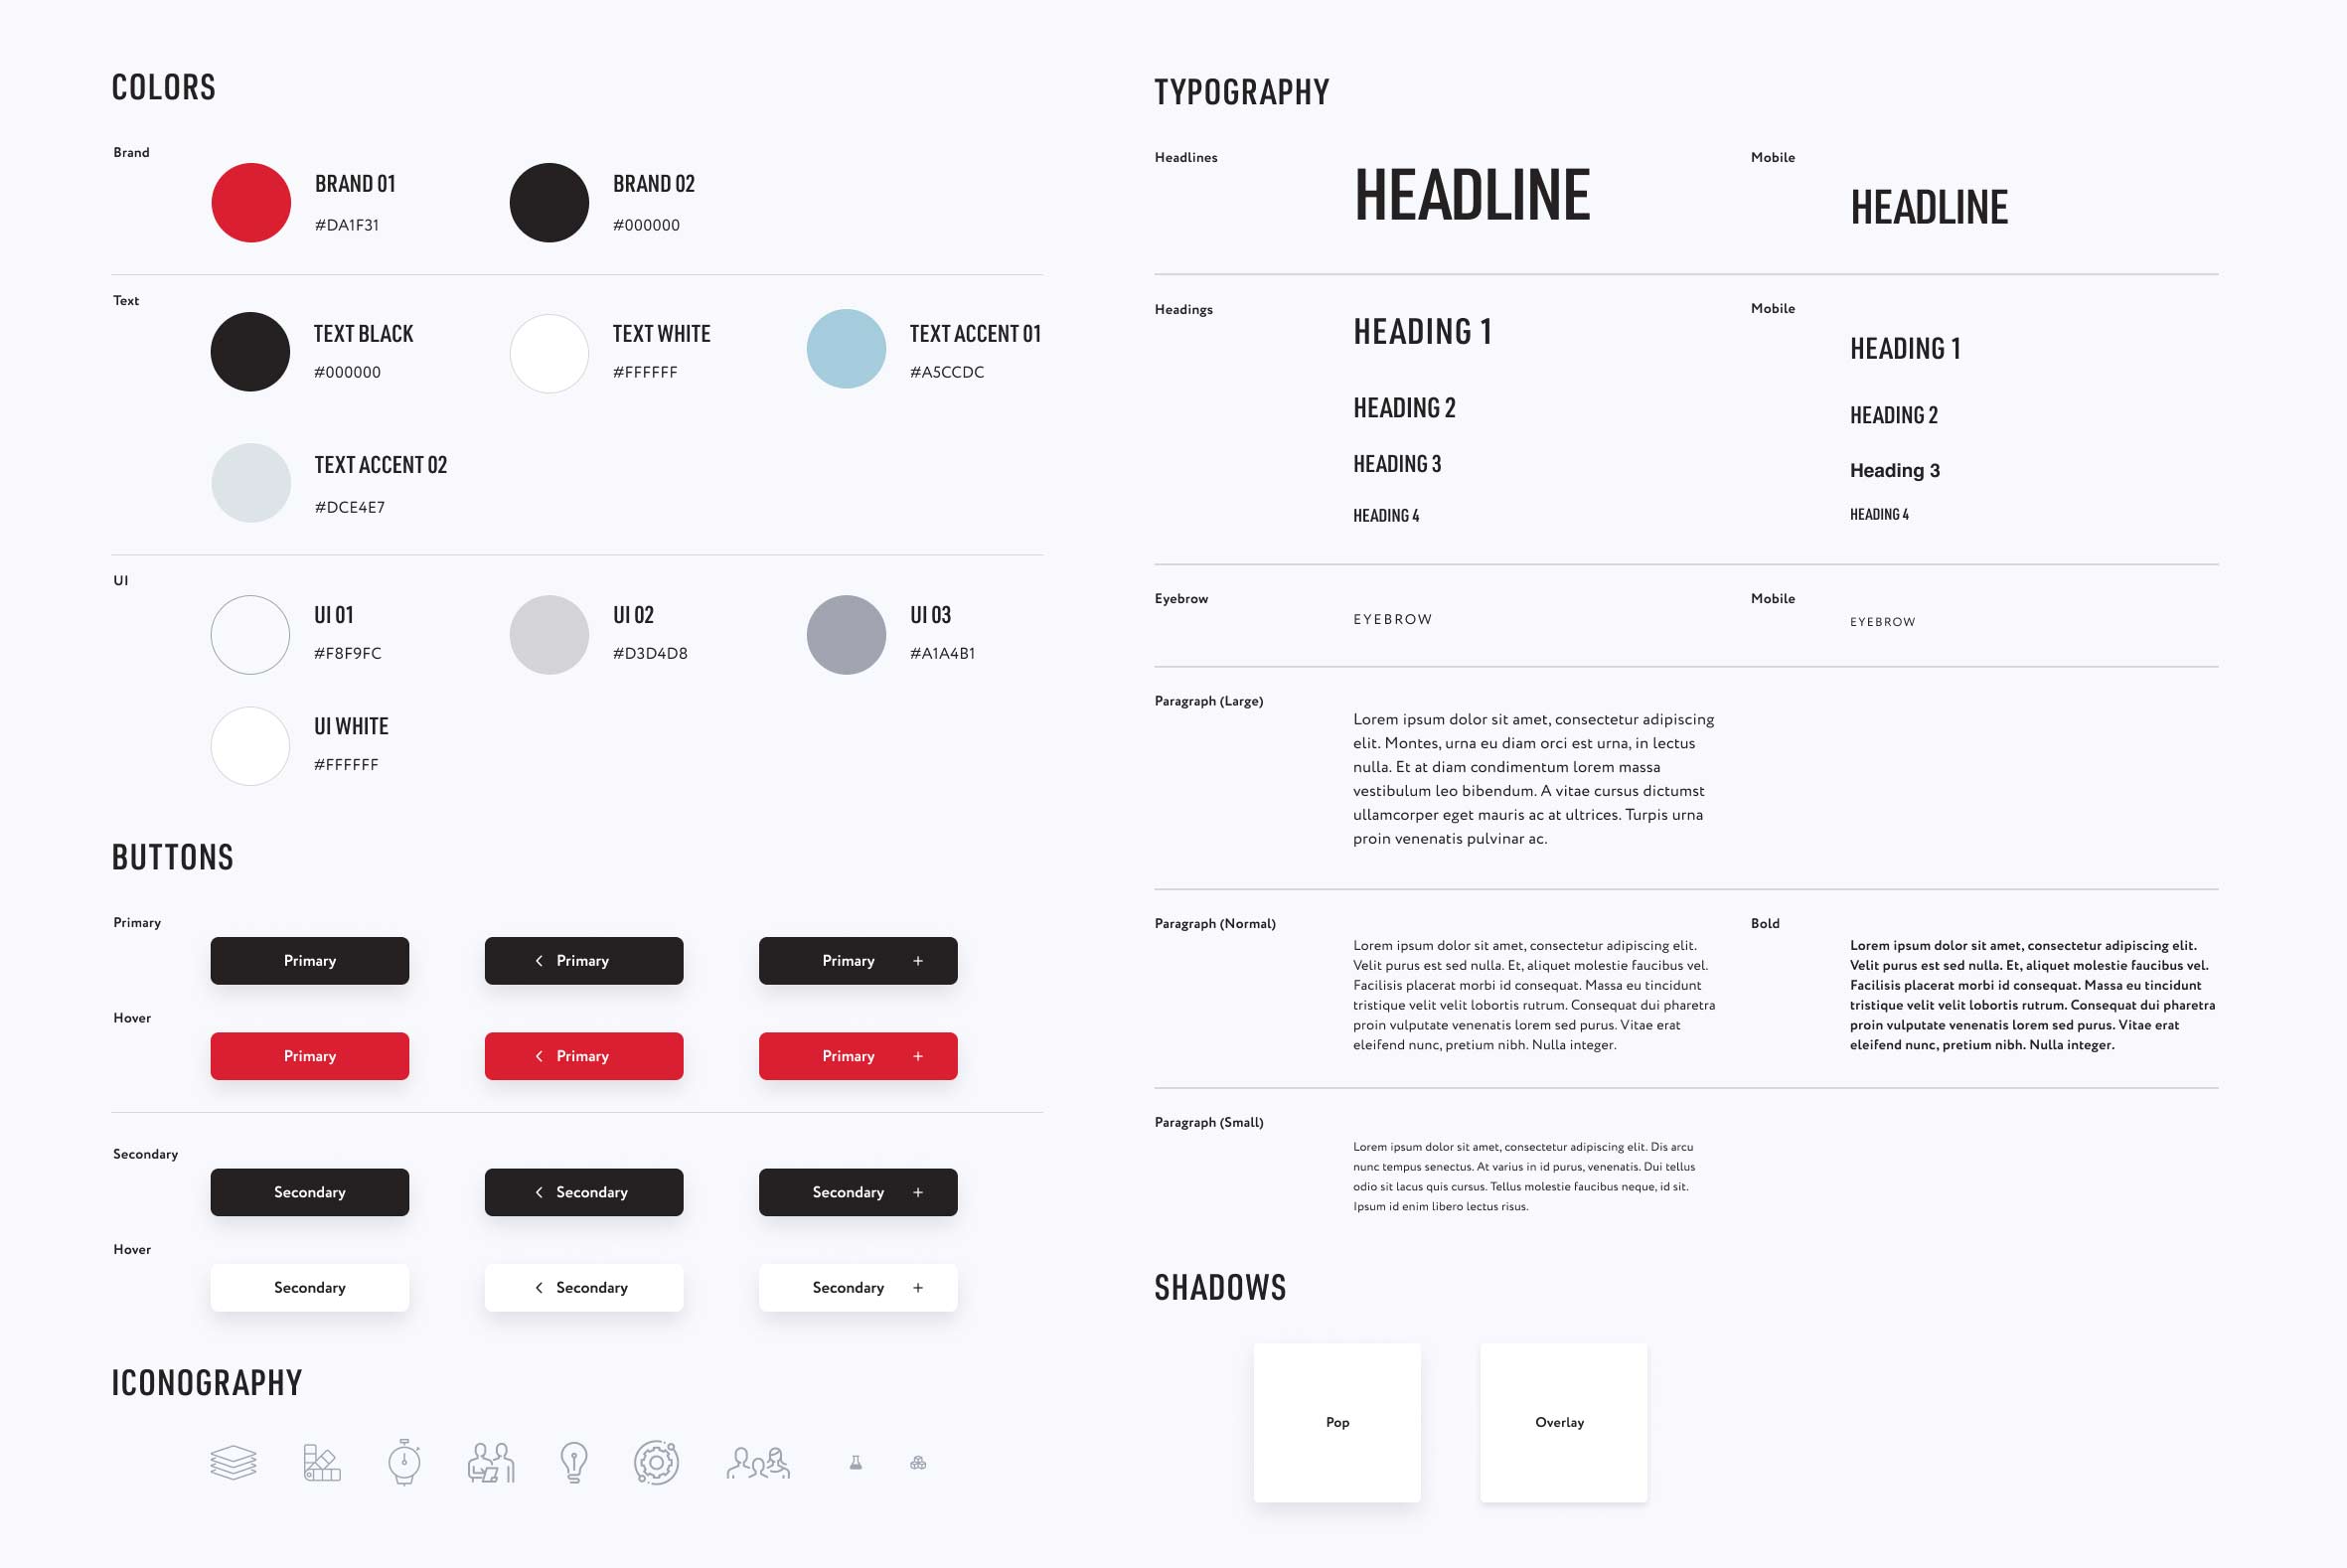 Sneak peek of design system in Figma. Includes: Logo, colors, typography, button statefulness, iconography, and more.